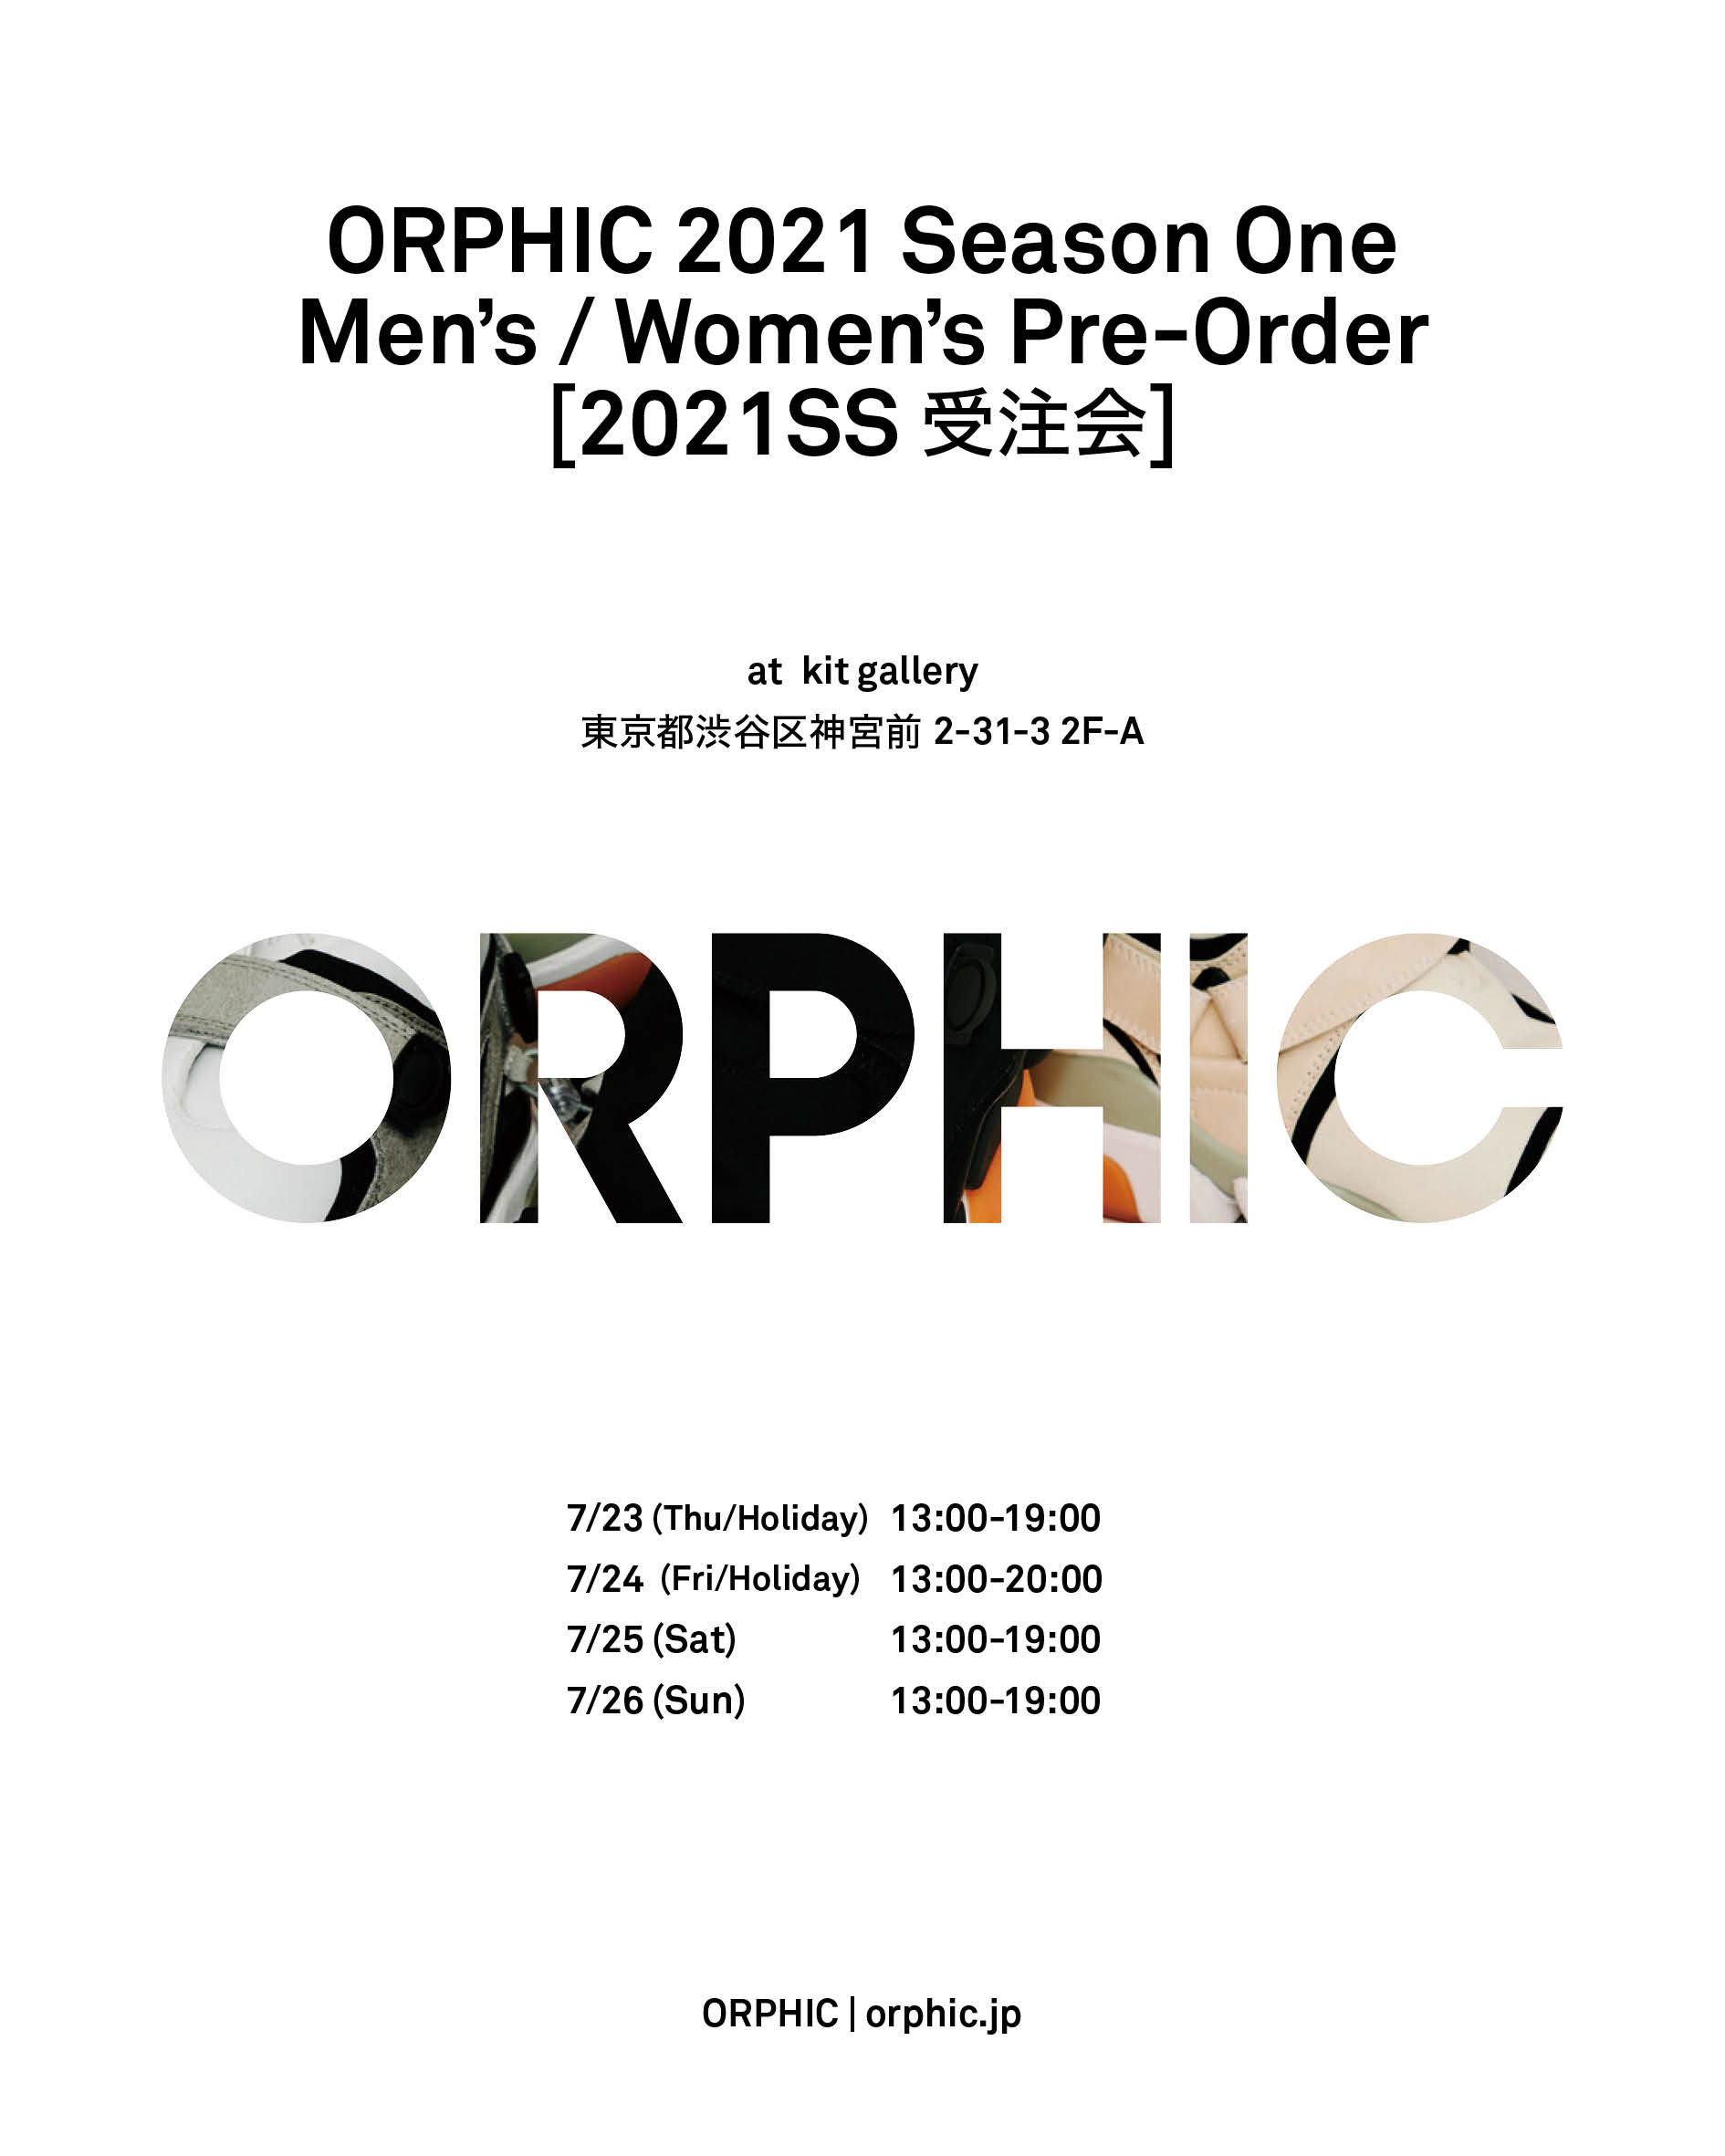 http://kit-gallery.com/schedule/files/20200703_ORPHIC_21SS_FLY_2.JPG